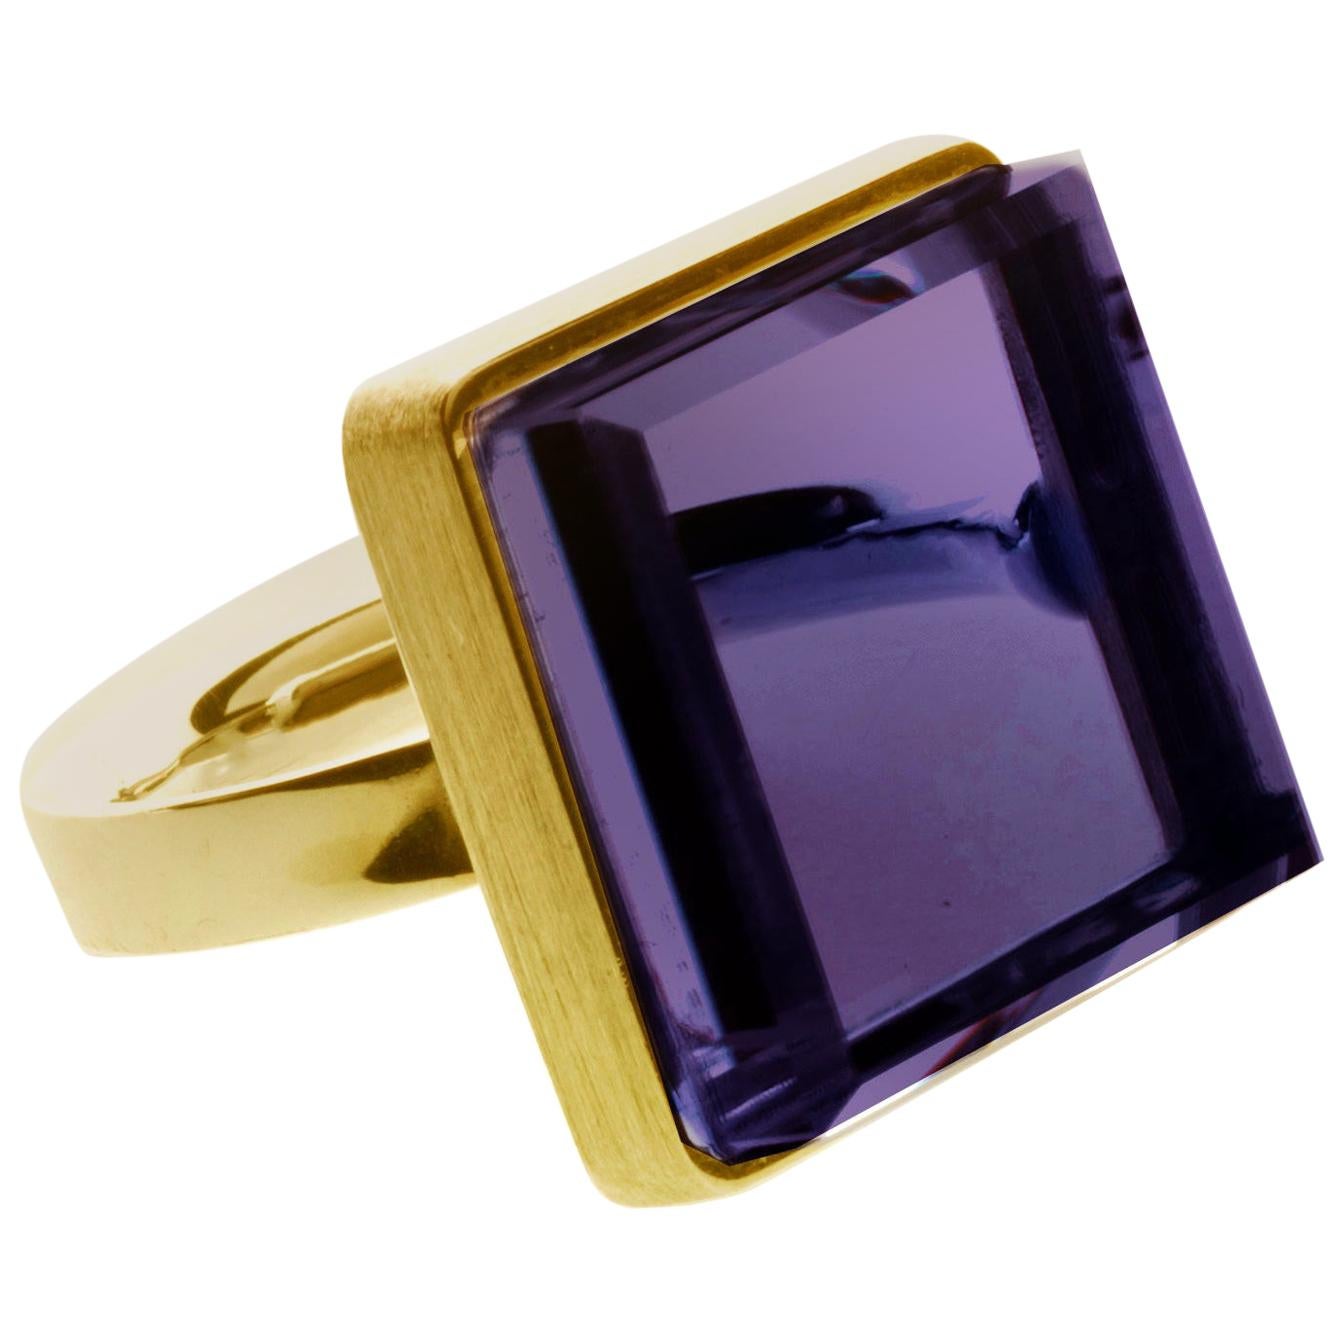 Featured in Vogue Rose Gold Art Deco Style Men Ring with Dark Amethyst For Sale